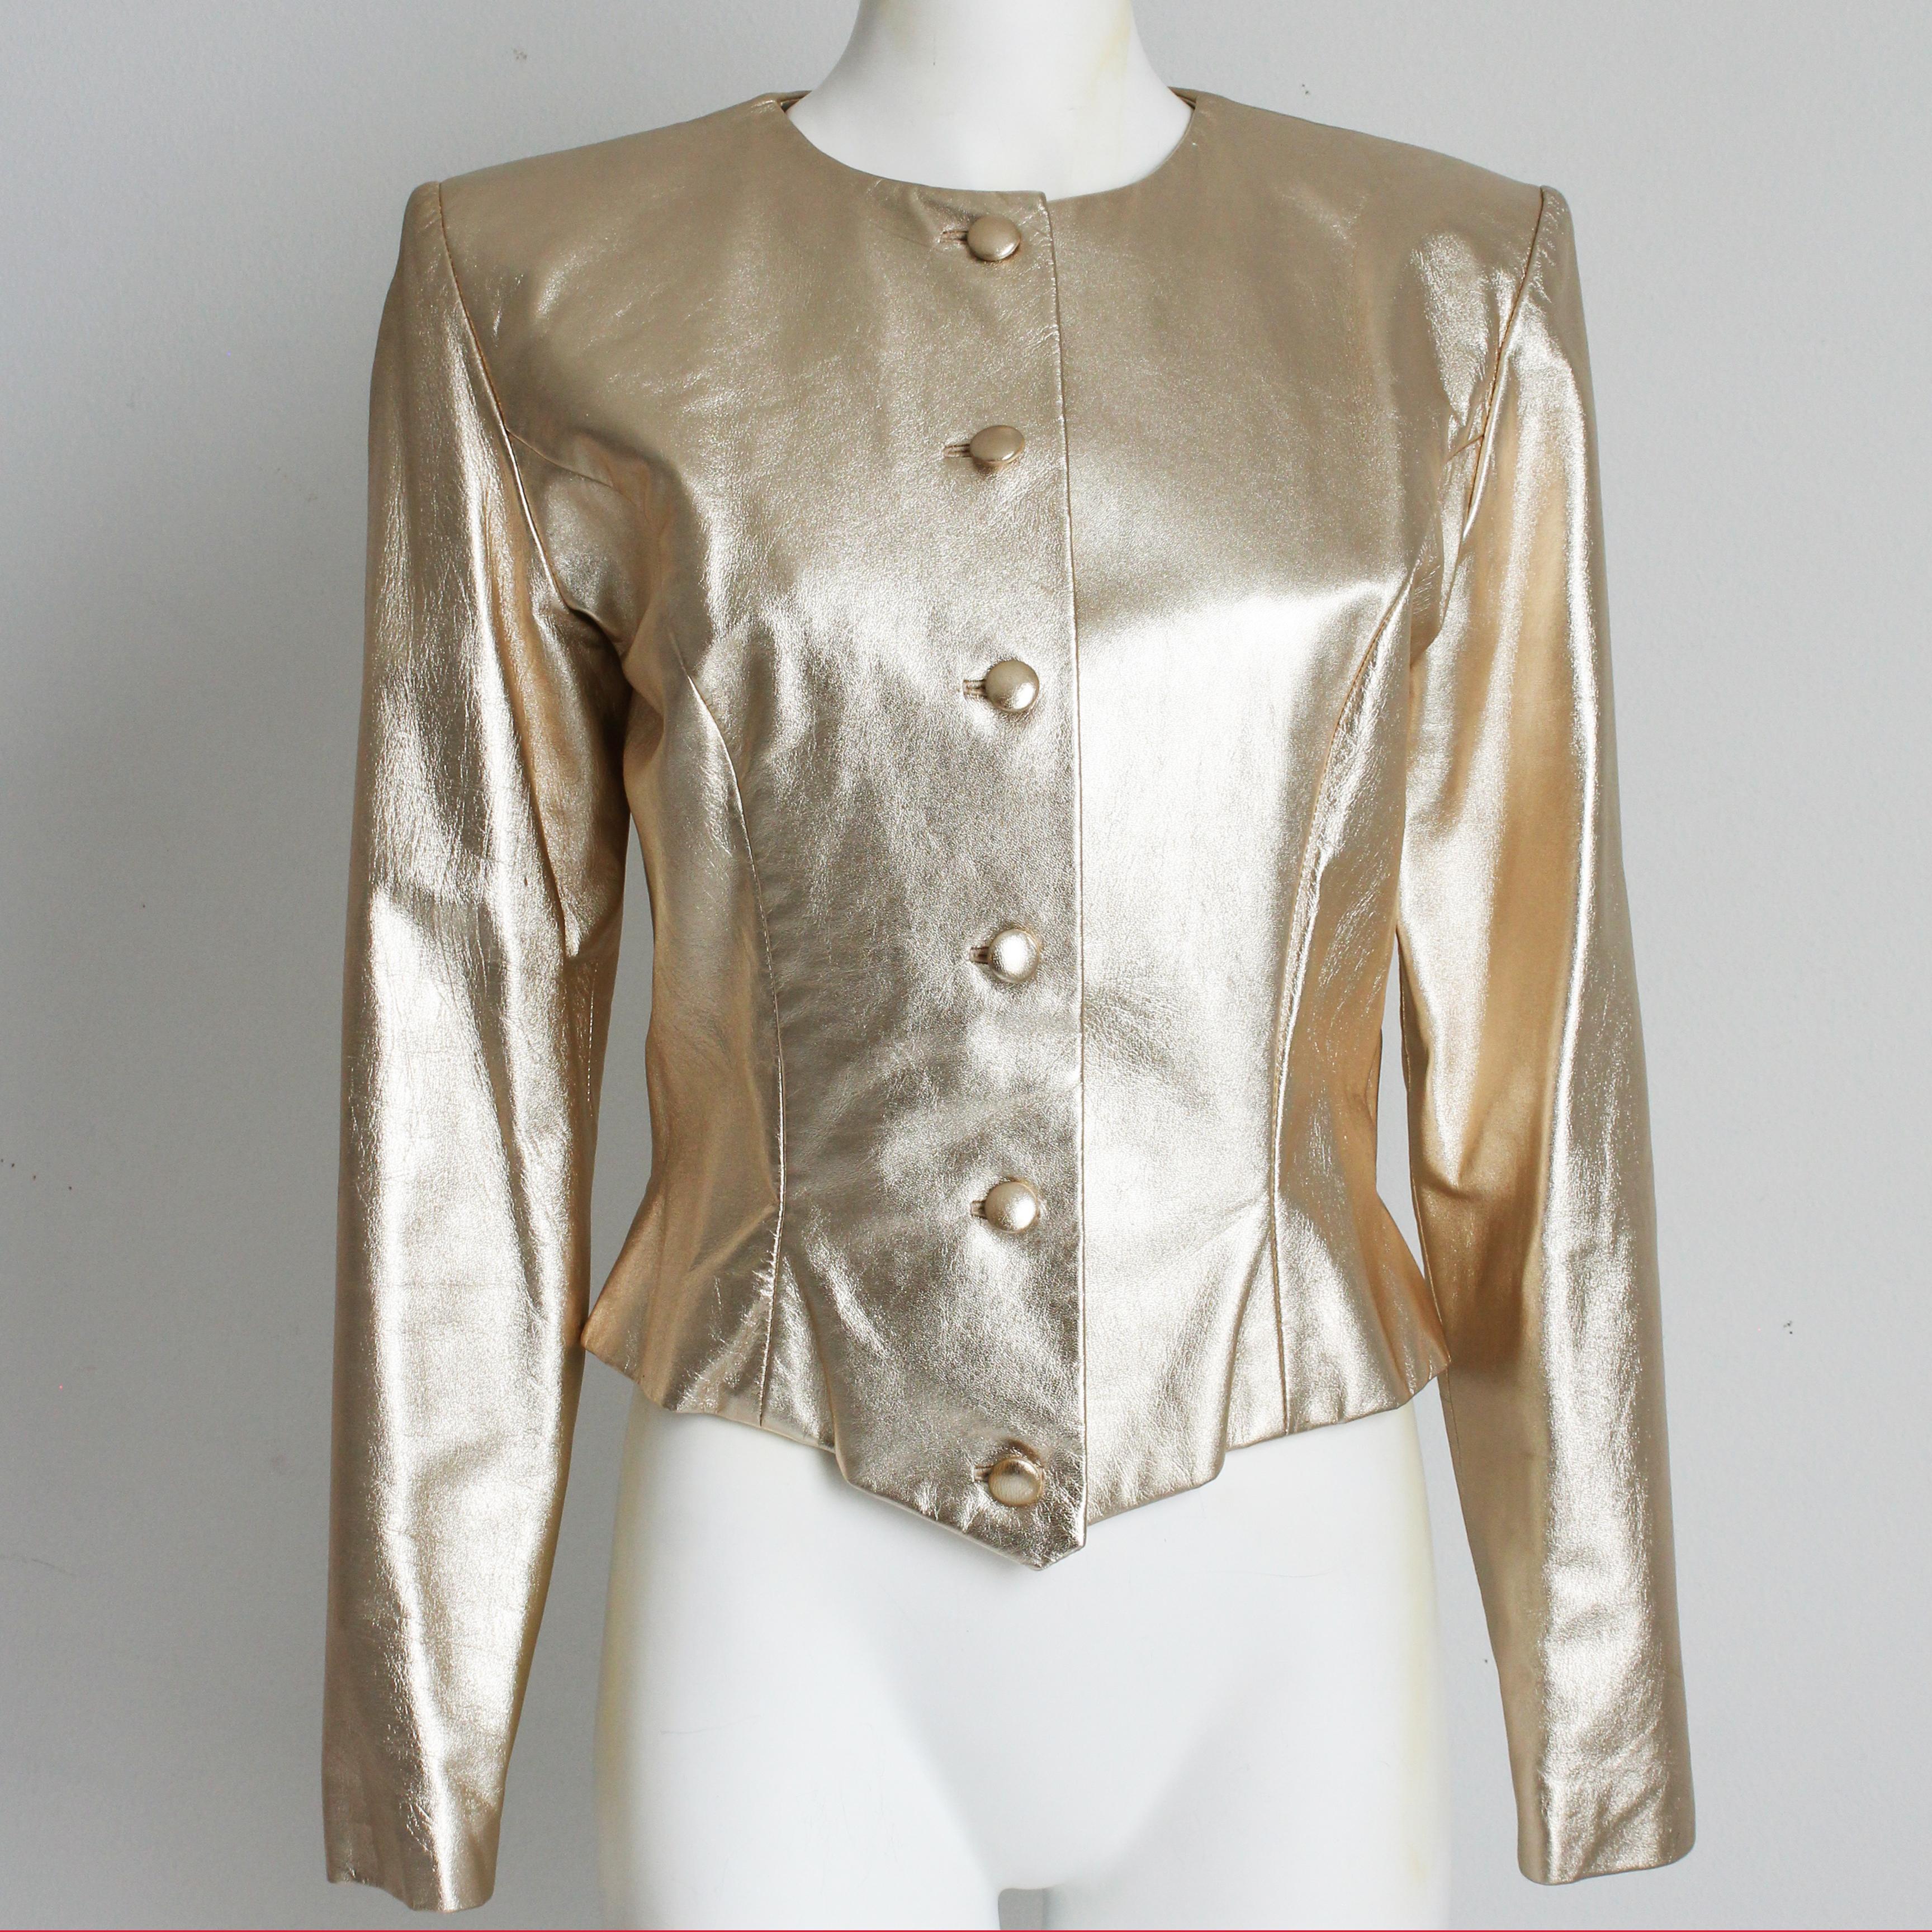 Authentic, vintage, preowned Vicky Tiel Couture Gold Leather Jacket Cropped Size 42, circa the 90s. 

Shimmery and fabulous, it's made from metallic gold leather, it fastens with leather covered buttons and features a fitted waist and a chic peplum